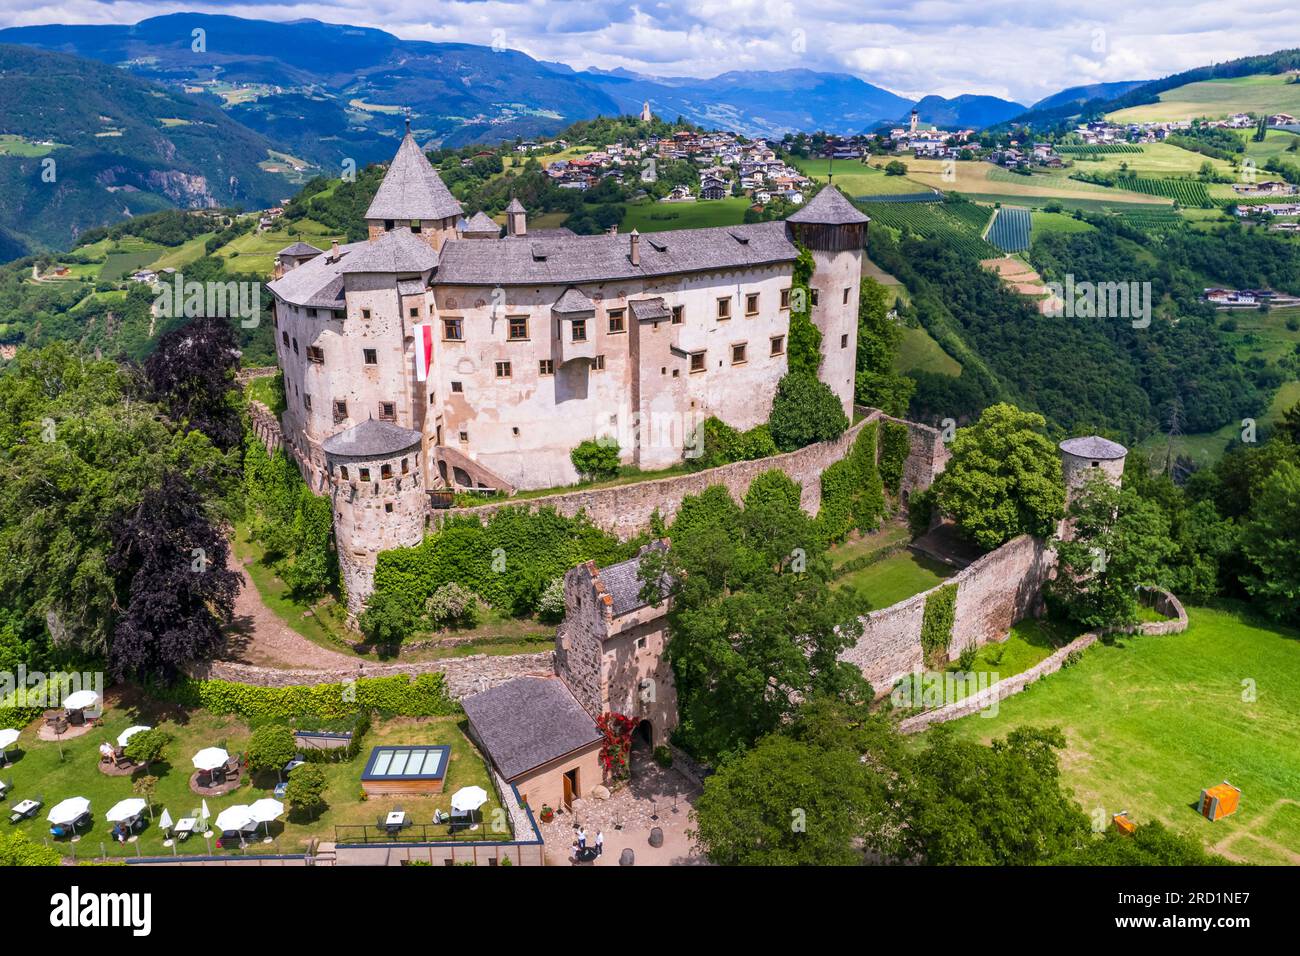 Beautiful medieval castles of northern Italy ,Alto Adige South Tyrol region. Presule castel, aerial drone high angle view Stock Photo